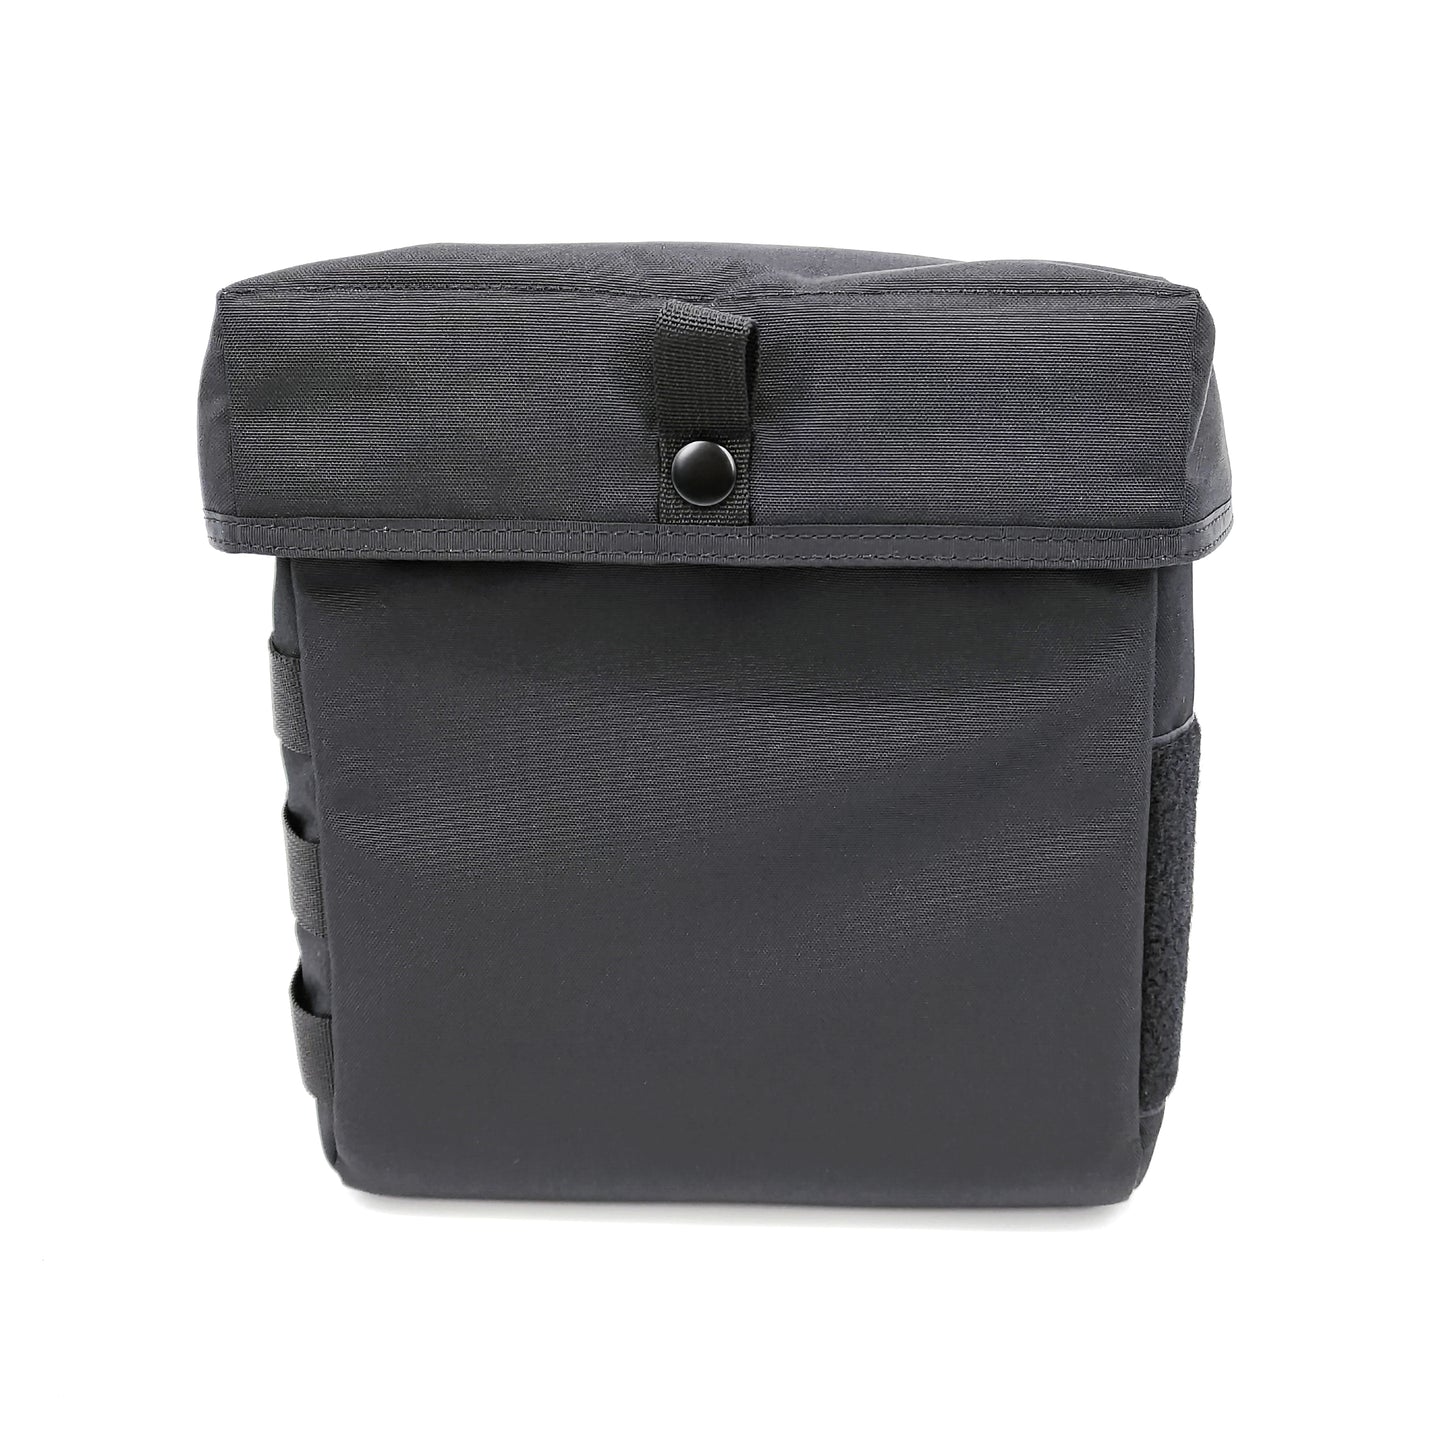 TOP GEAR #S10 THIGH UTILITY POUCH